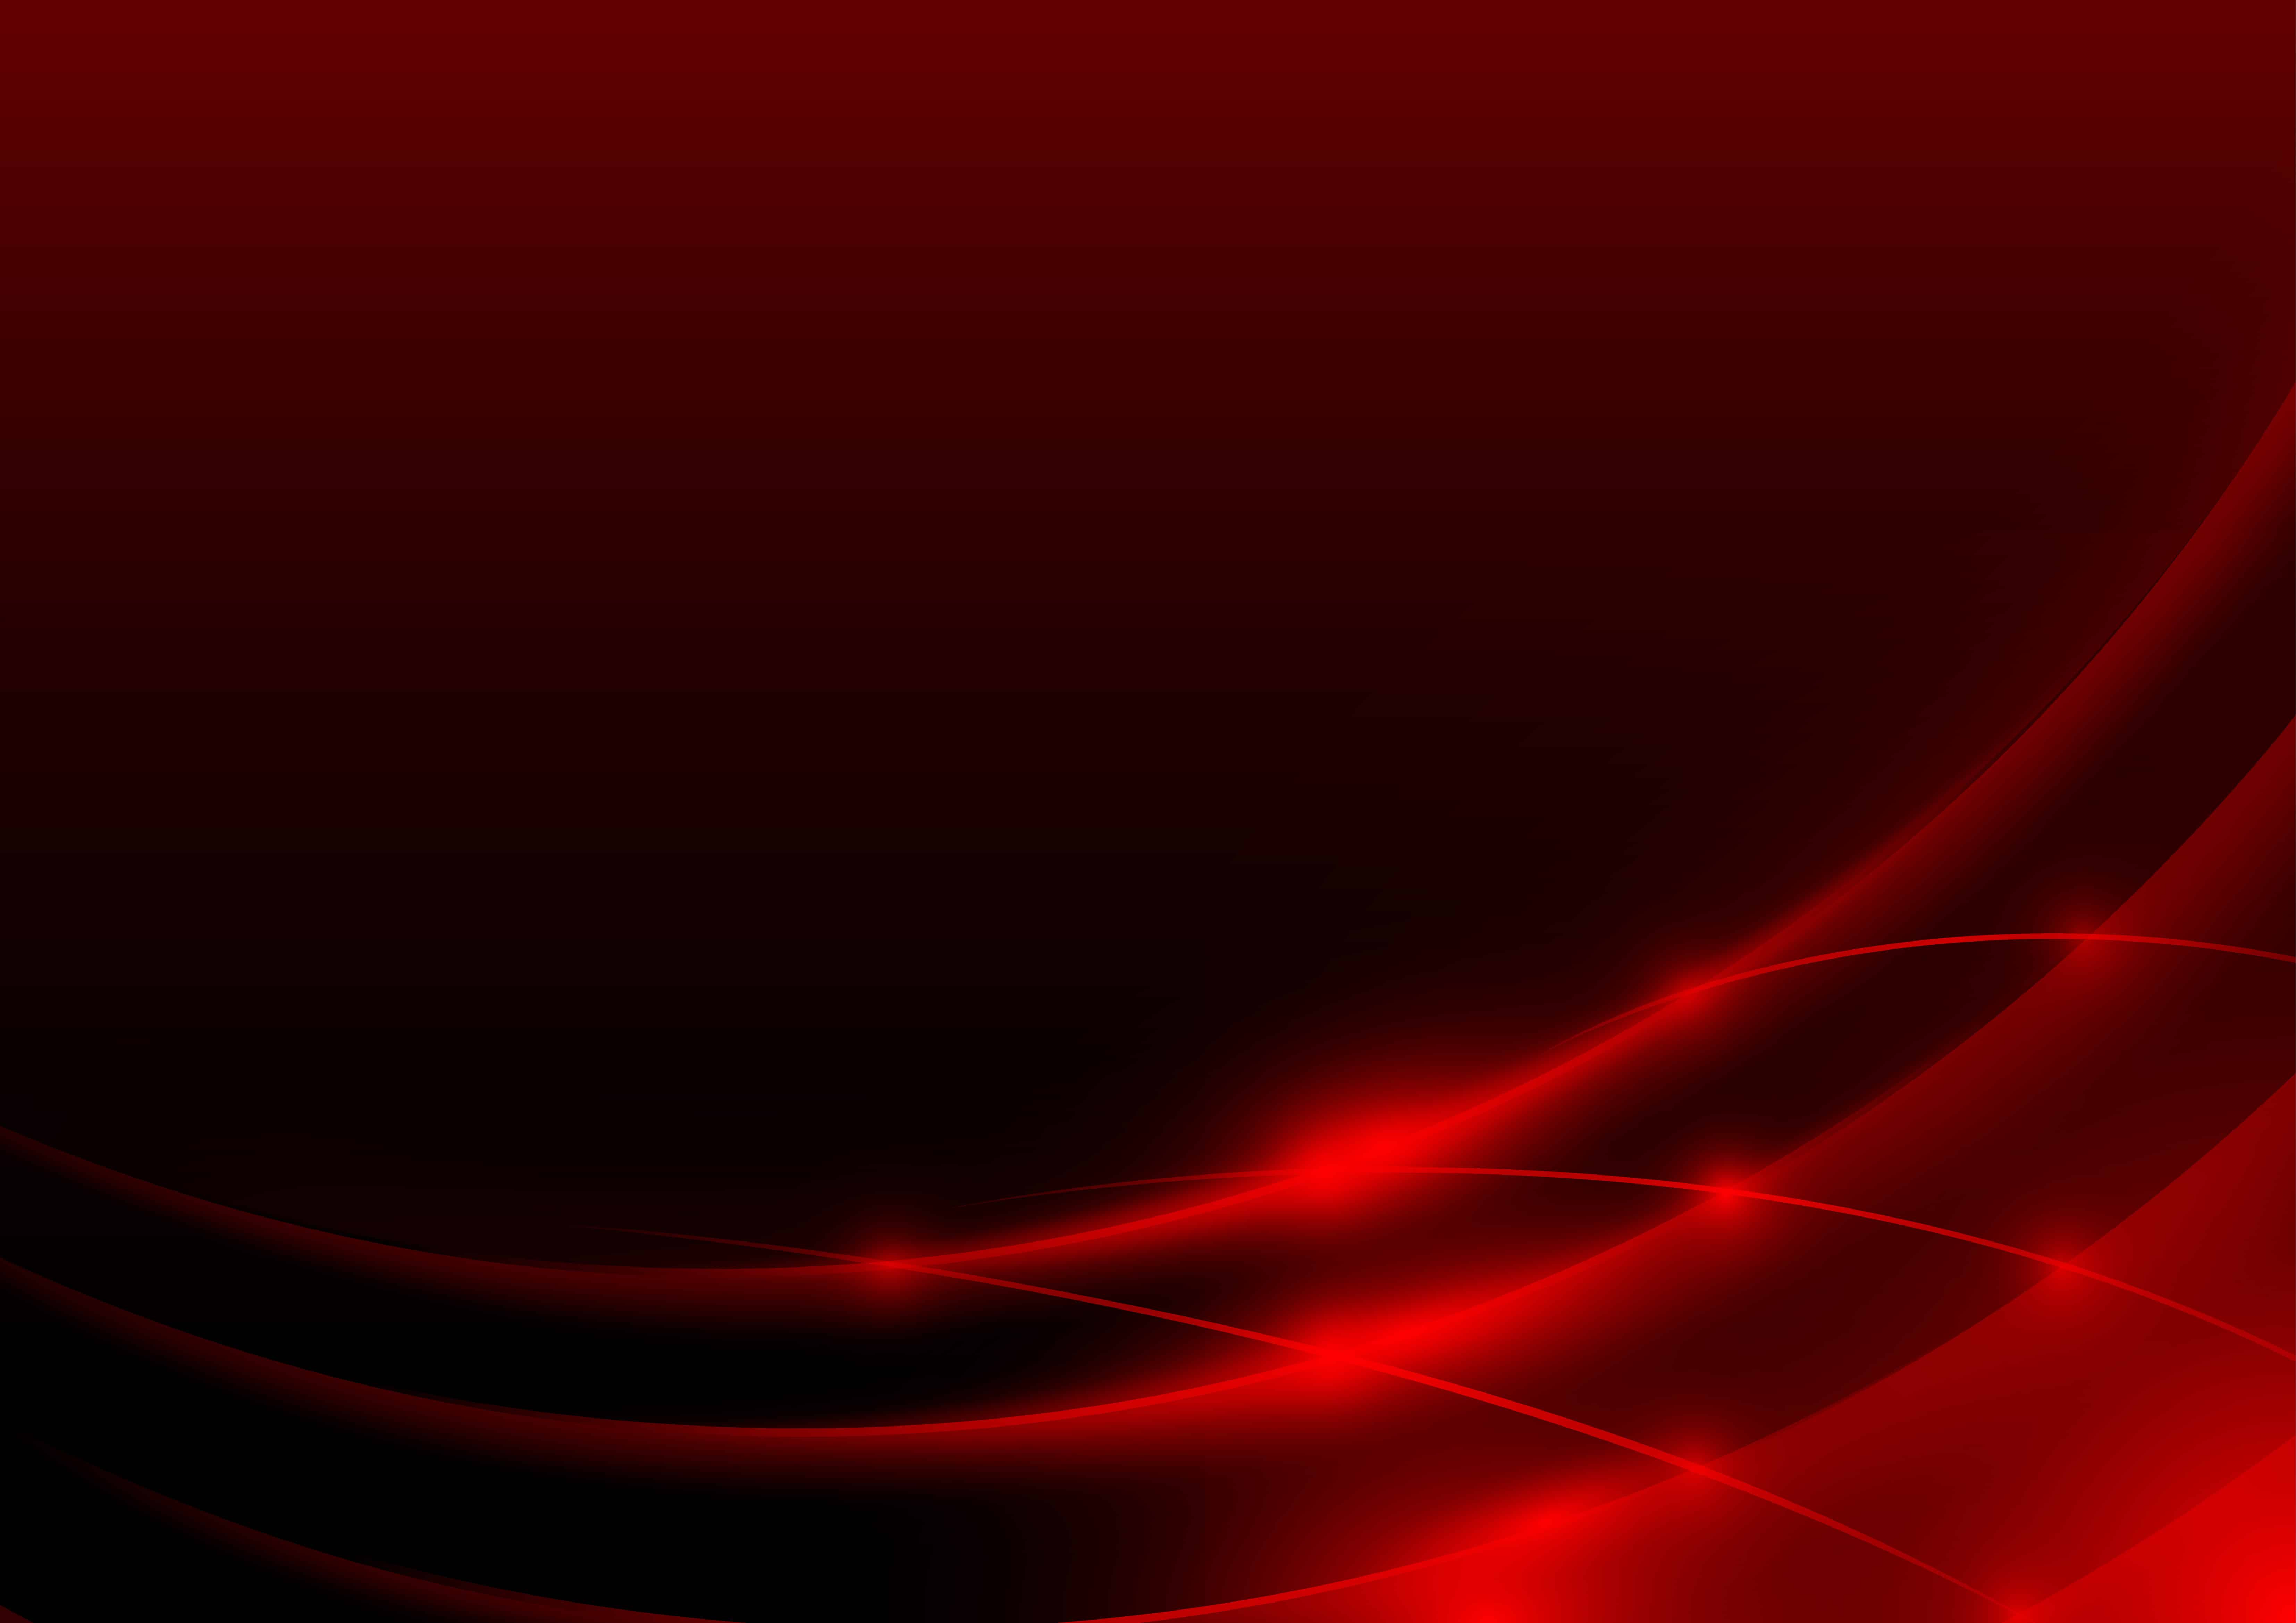 Red Glowing Edges - Abstract Background Illustration, Vector